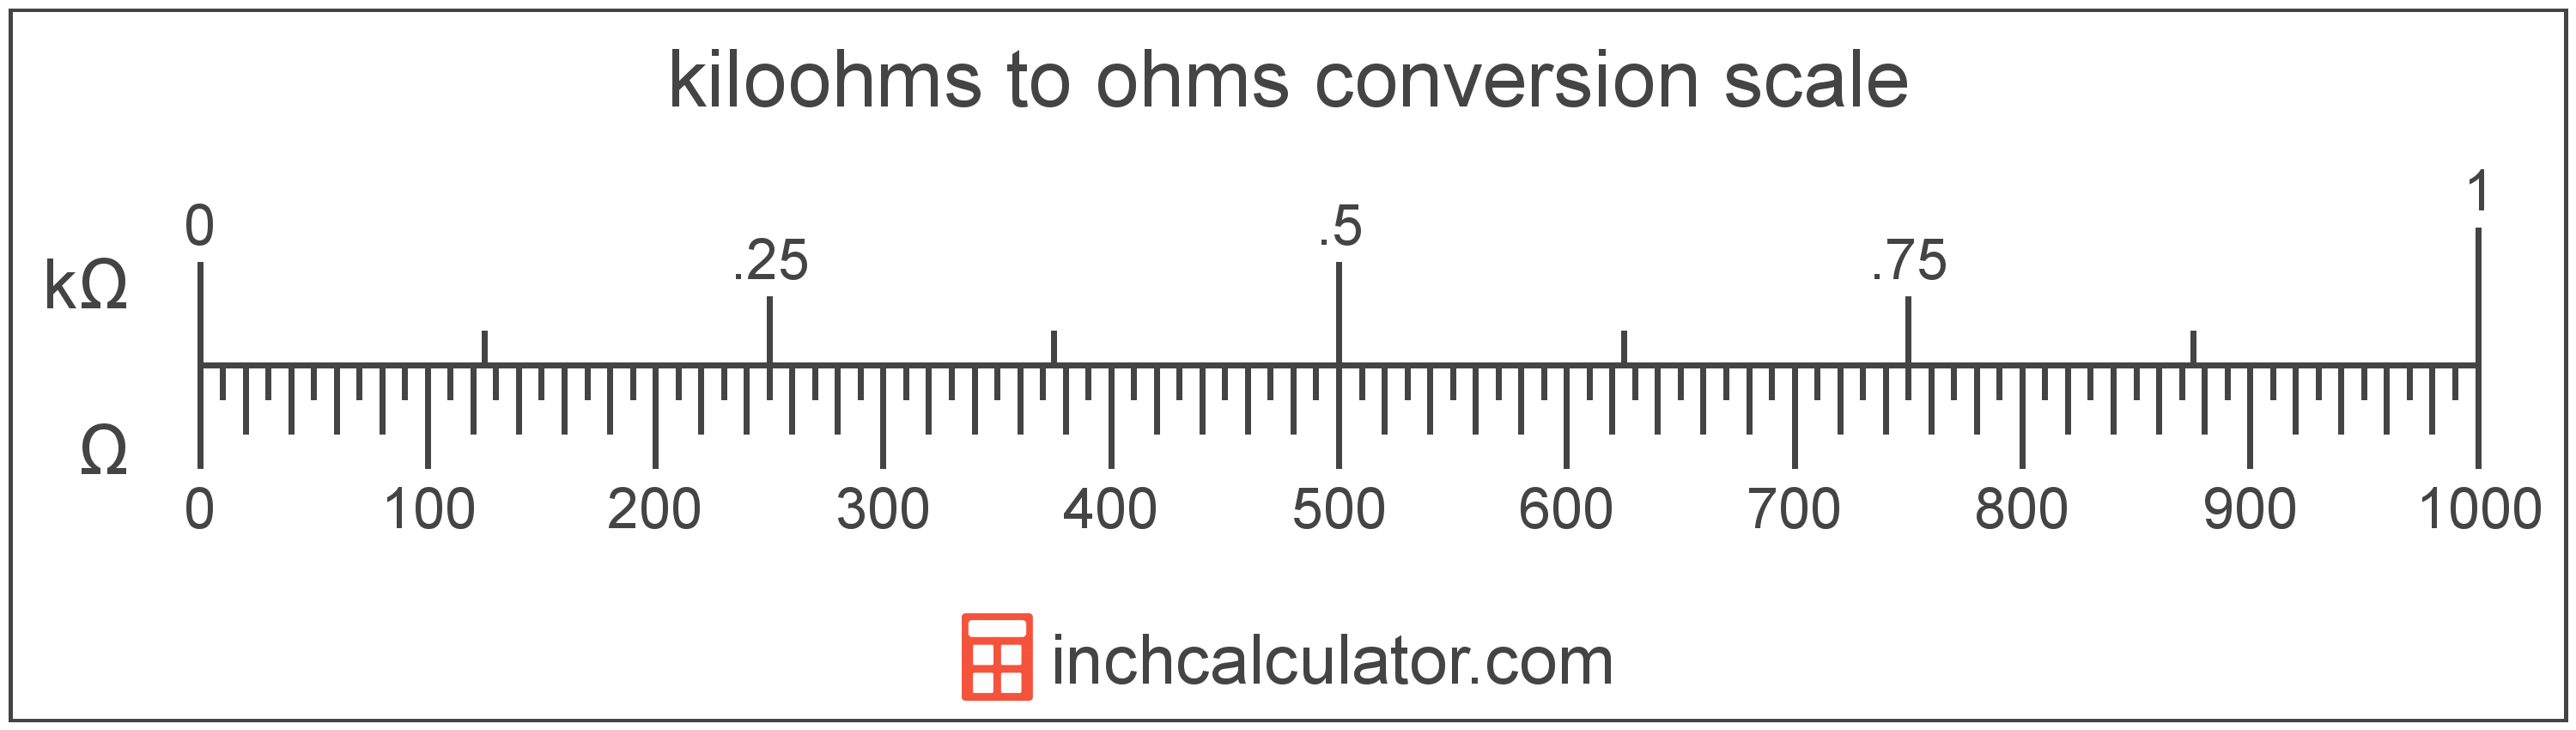 conversion scale showing ohms and equivalent kiloohms electrical resistance values